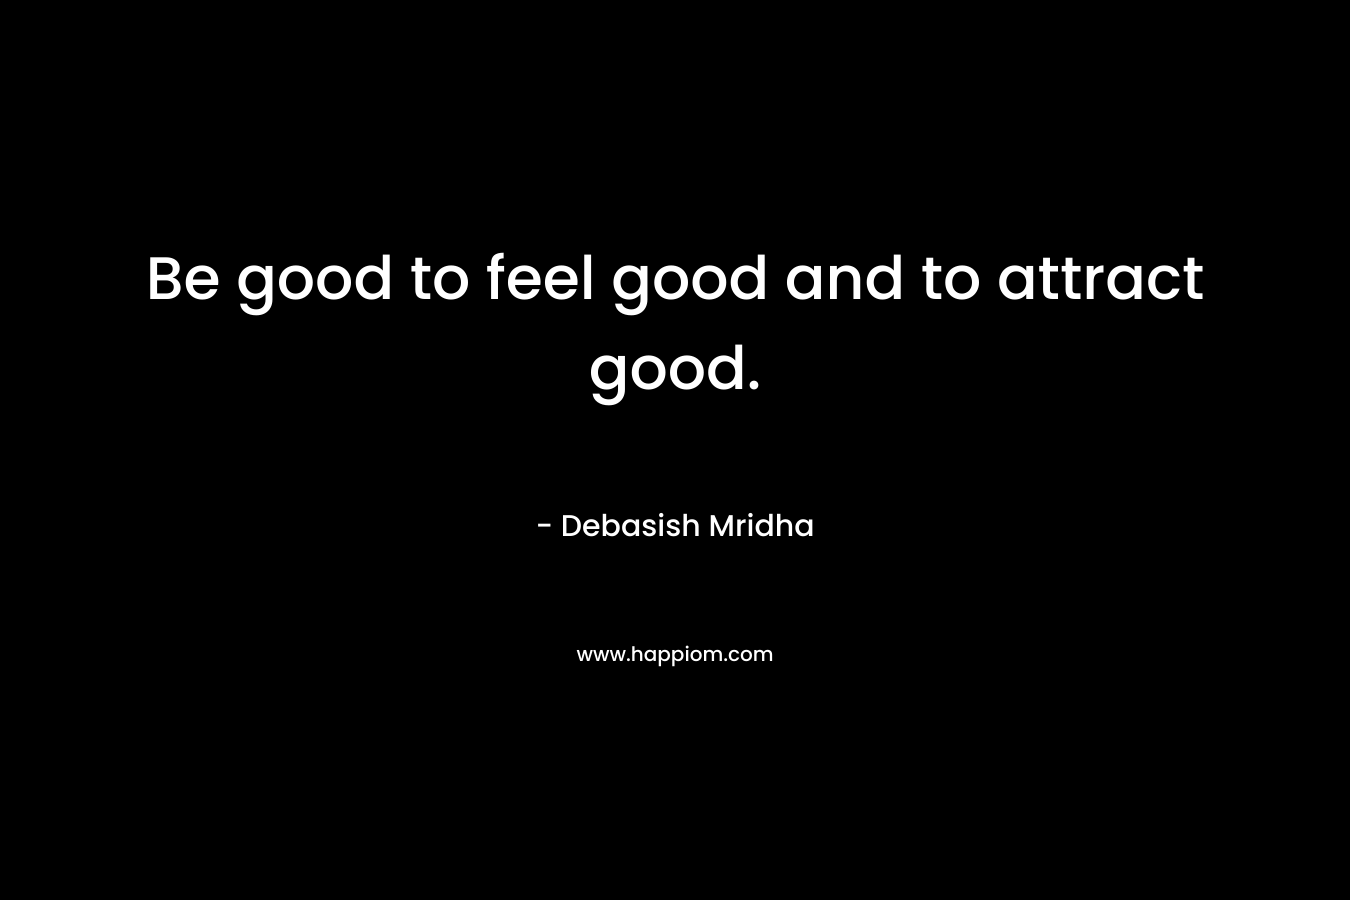 Be good to feel good and to attract good.